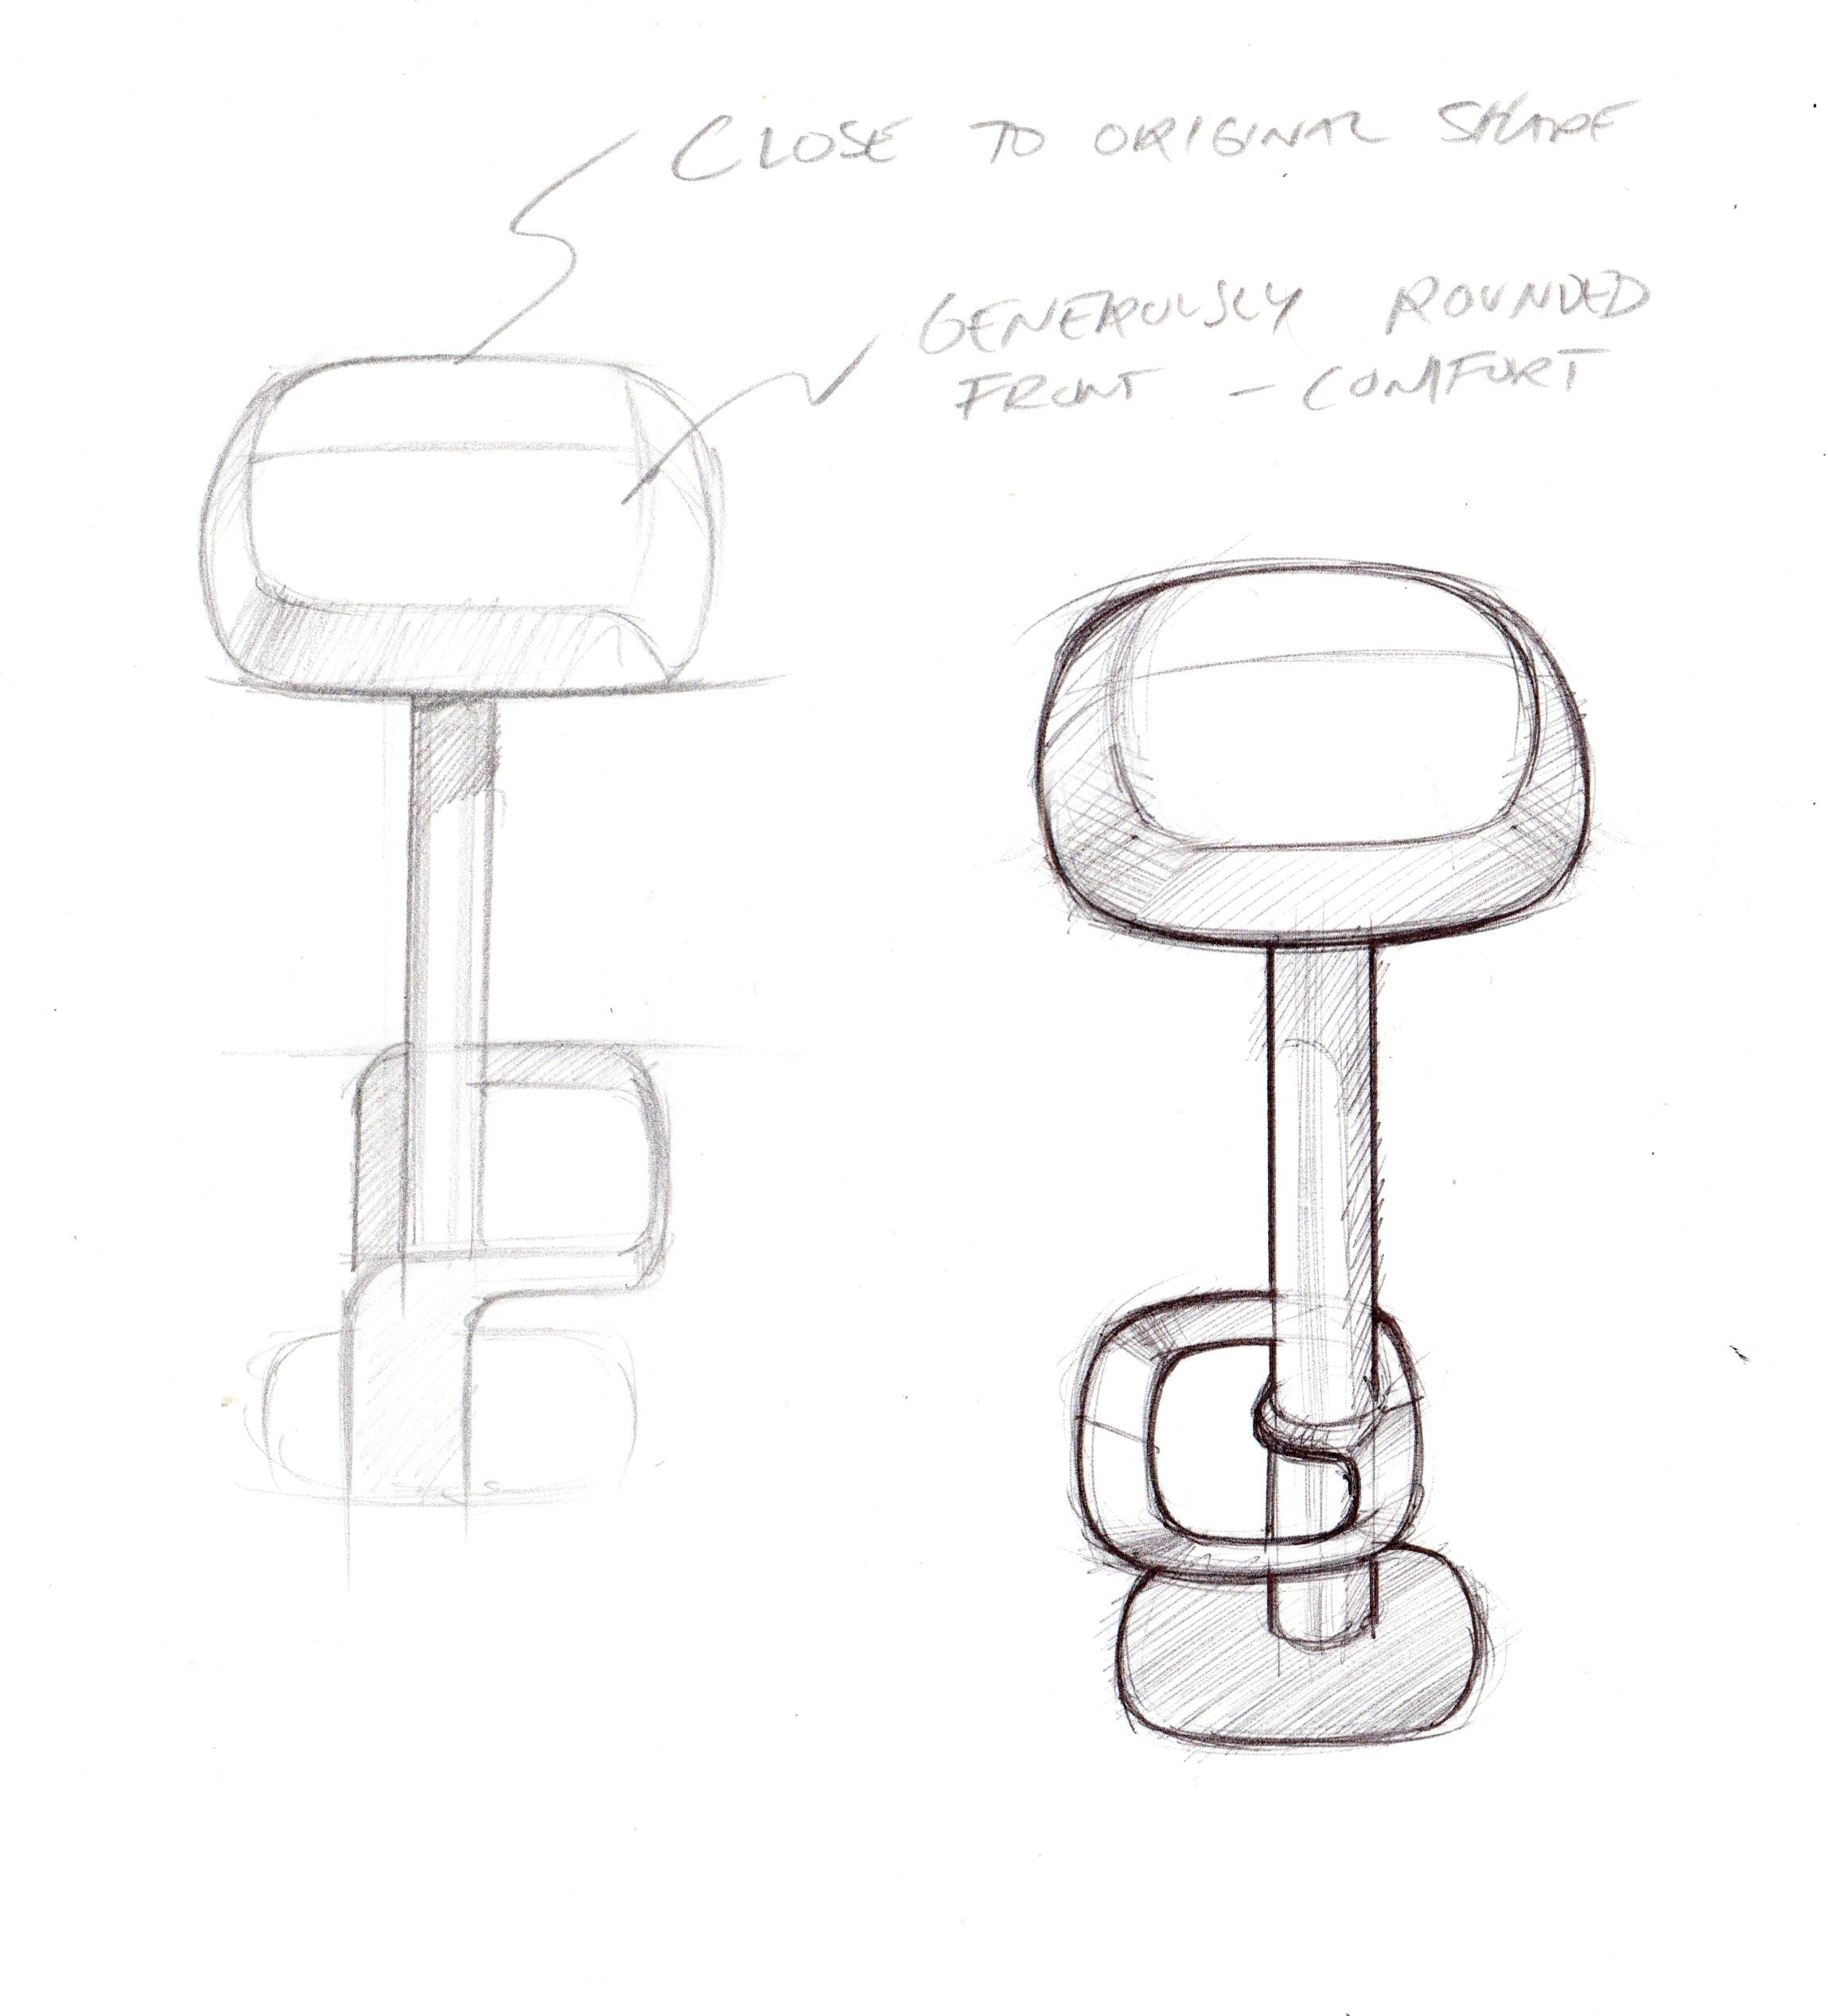 Sketches of Framery One's stool